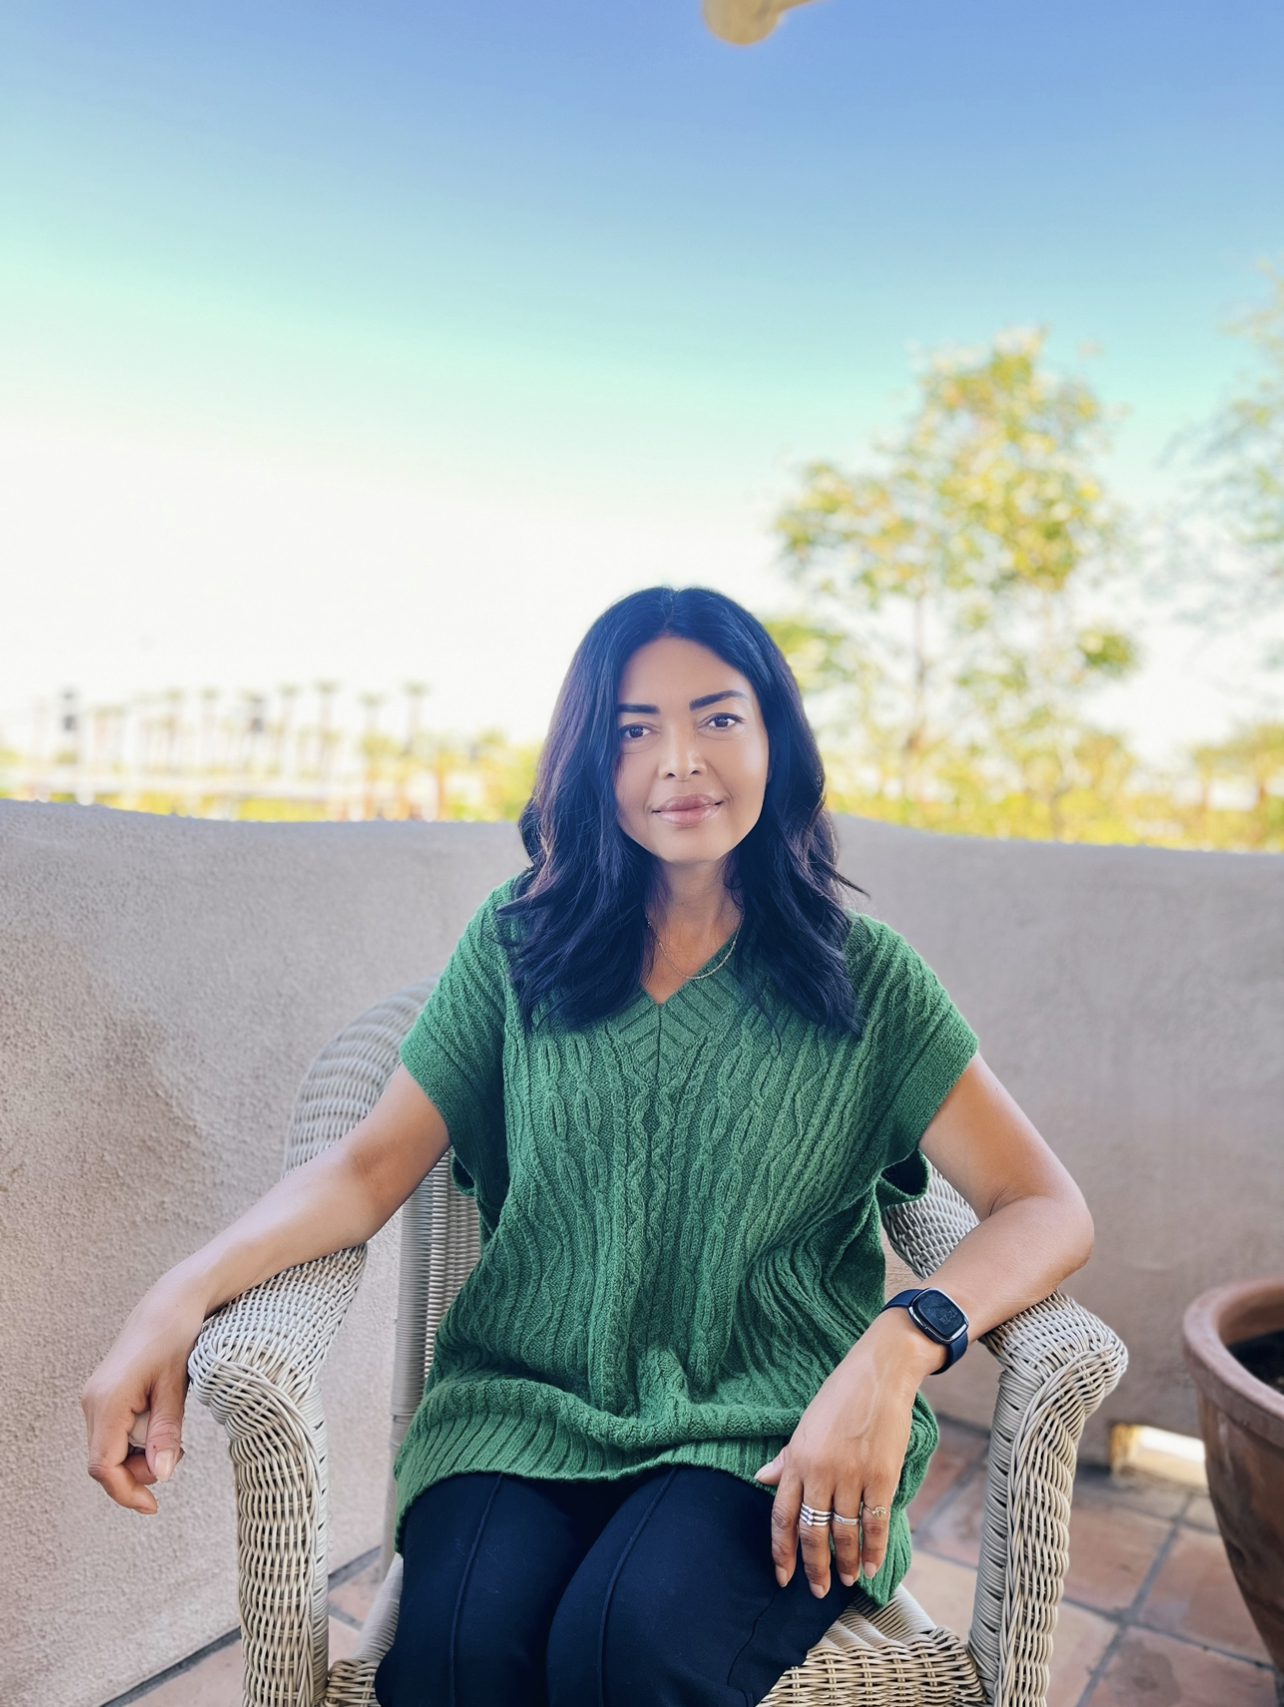 A woman sitting on a wicker chair outdoors wearing a green sweater and black watch, with blurred greenery in the background.